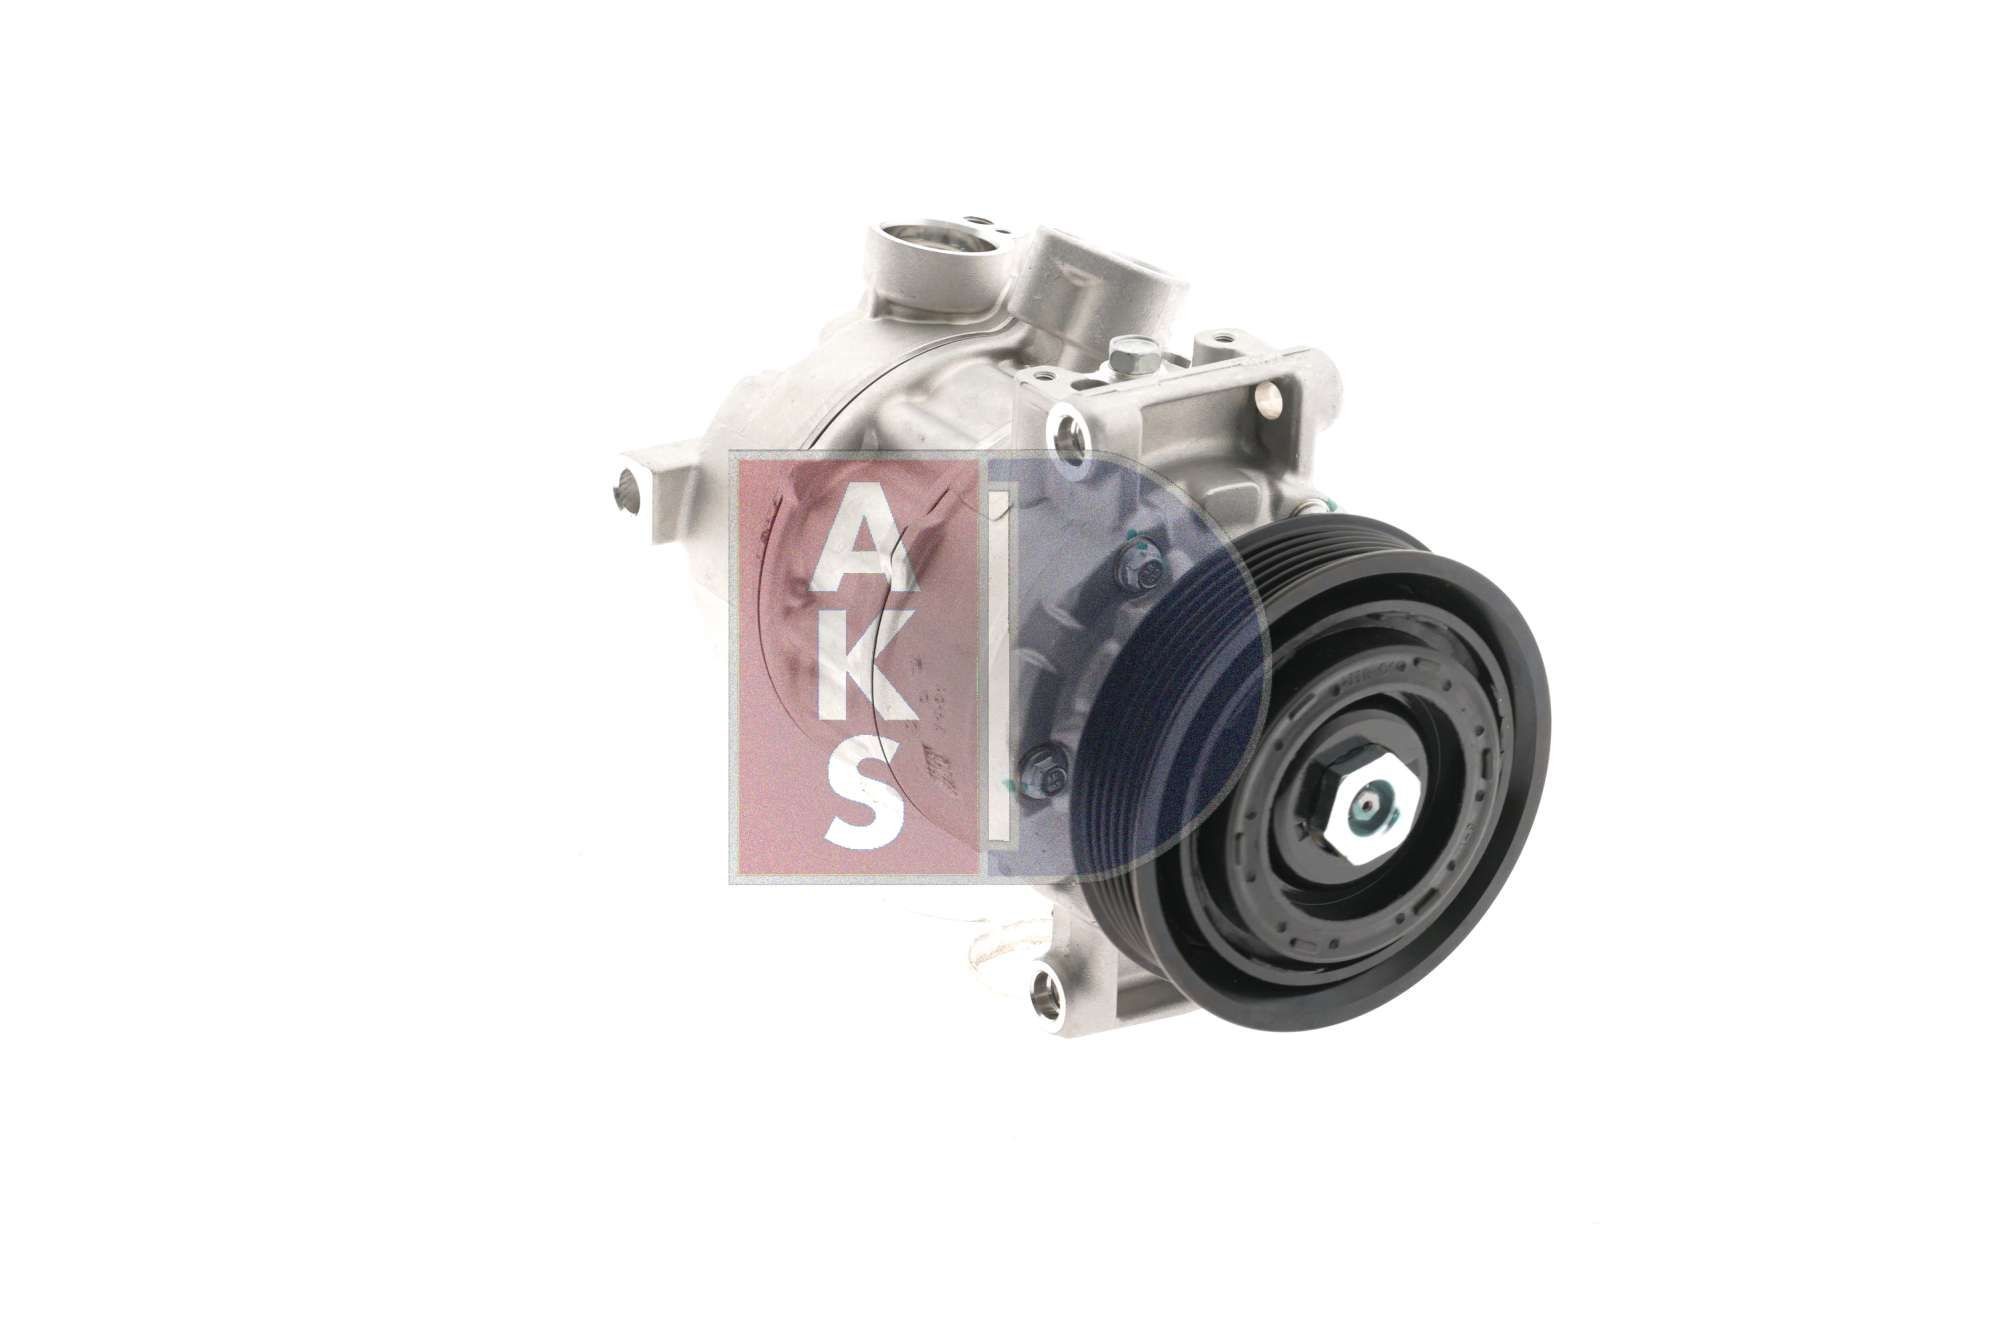 Air conditioning compressor 852938N from AKS DASIS